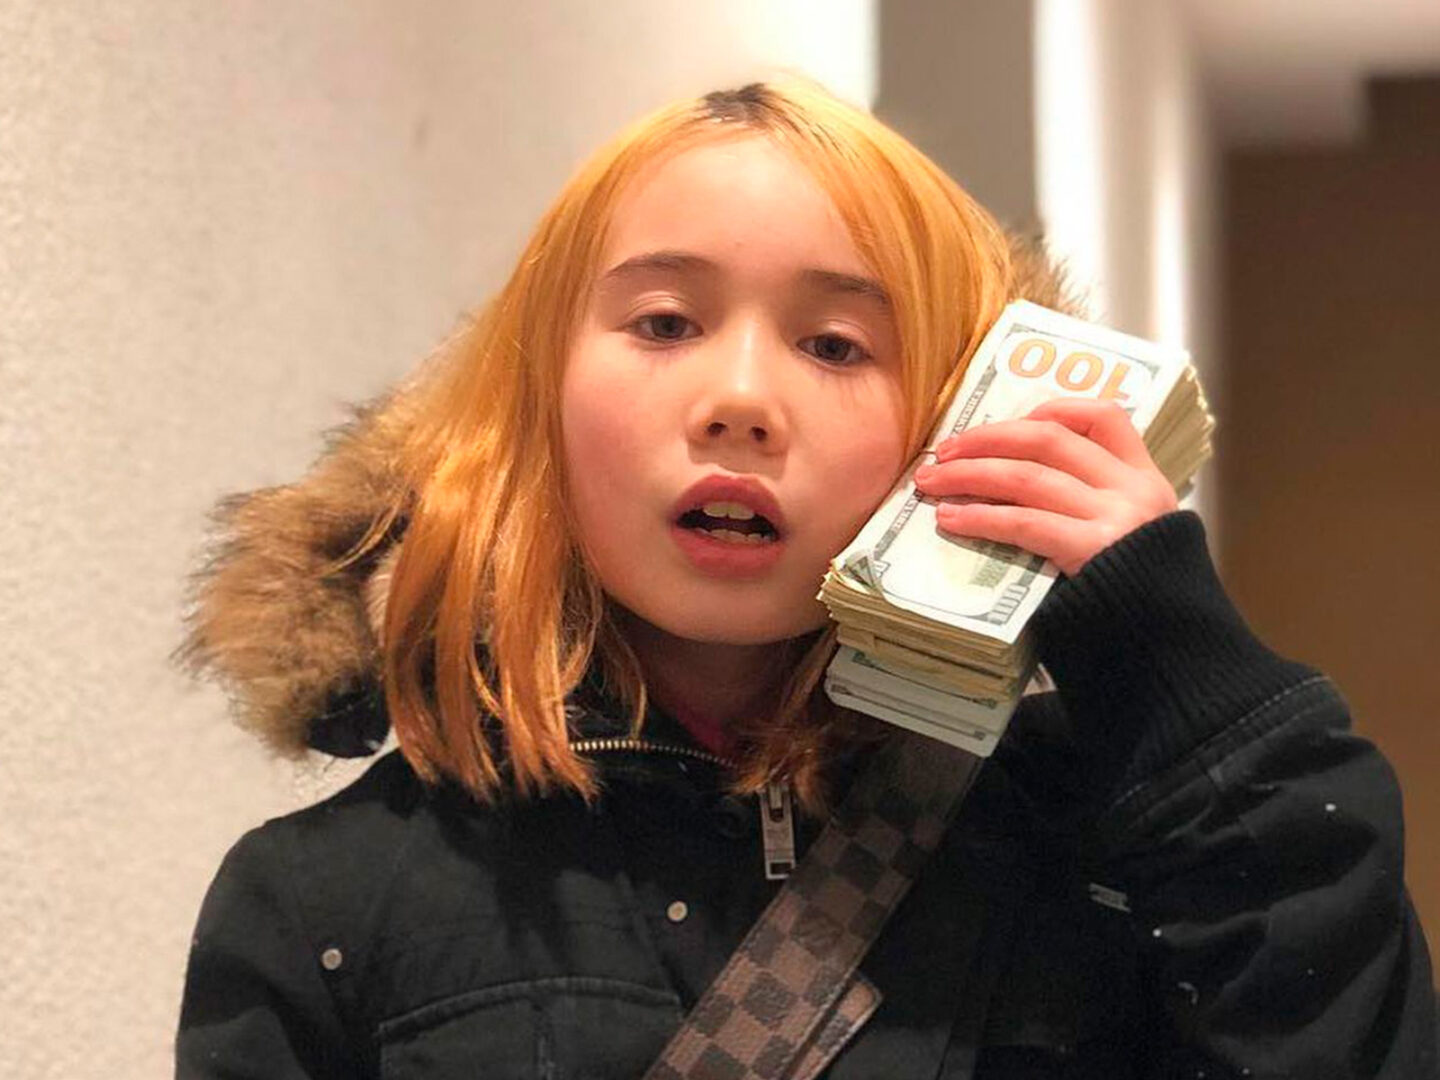 Rapper Lil Tay denies rumors about her death